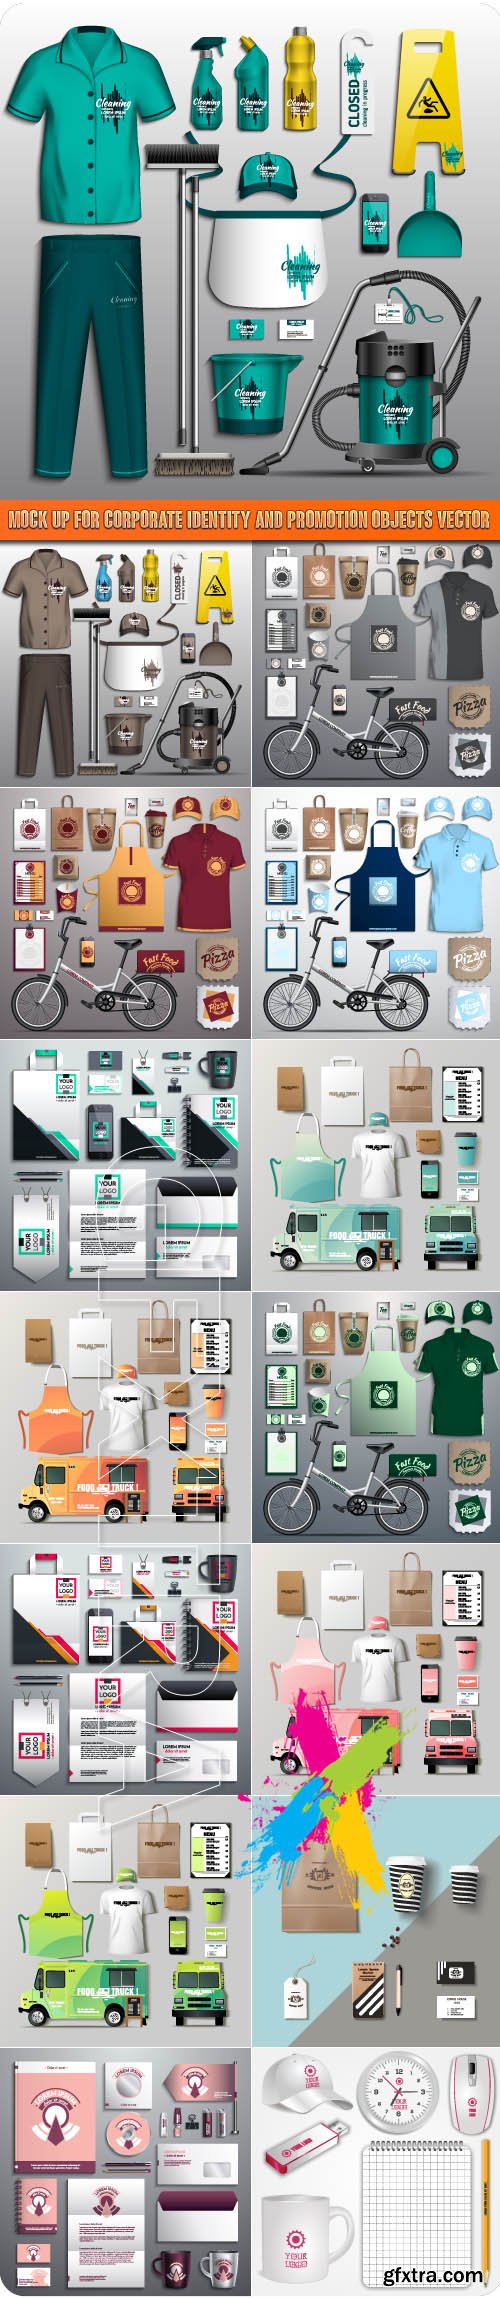 Mock up for corporate identity and promotion objects vector